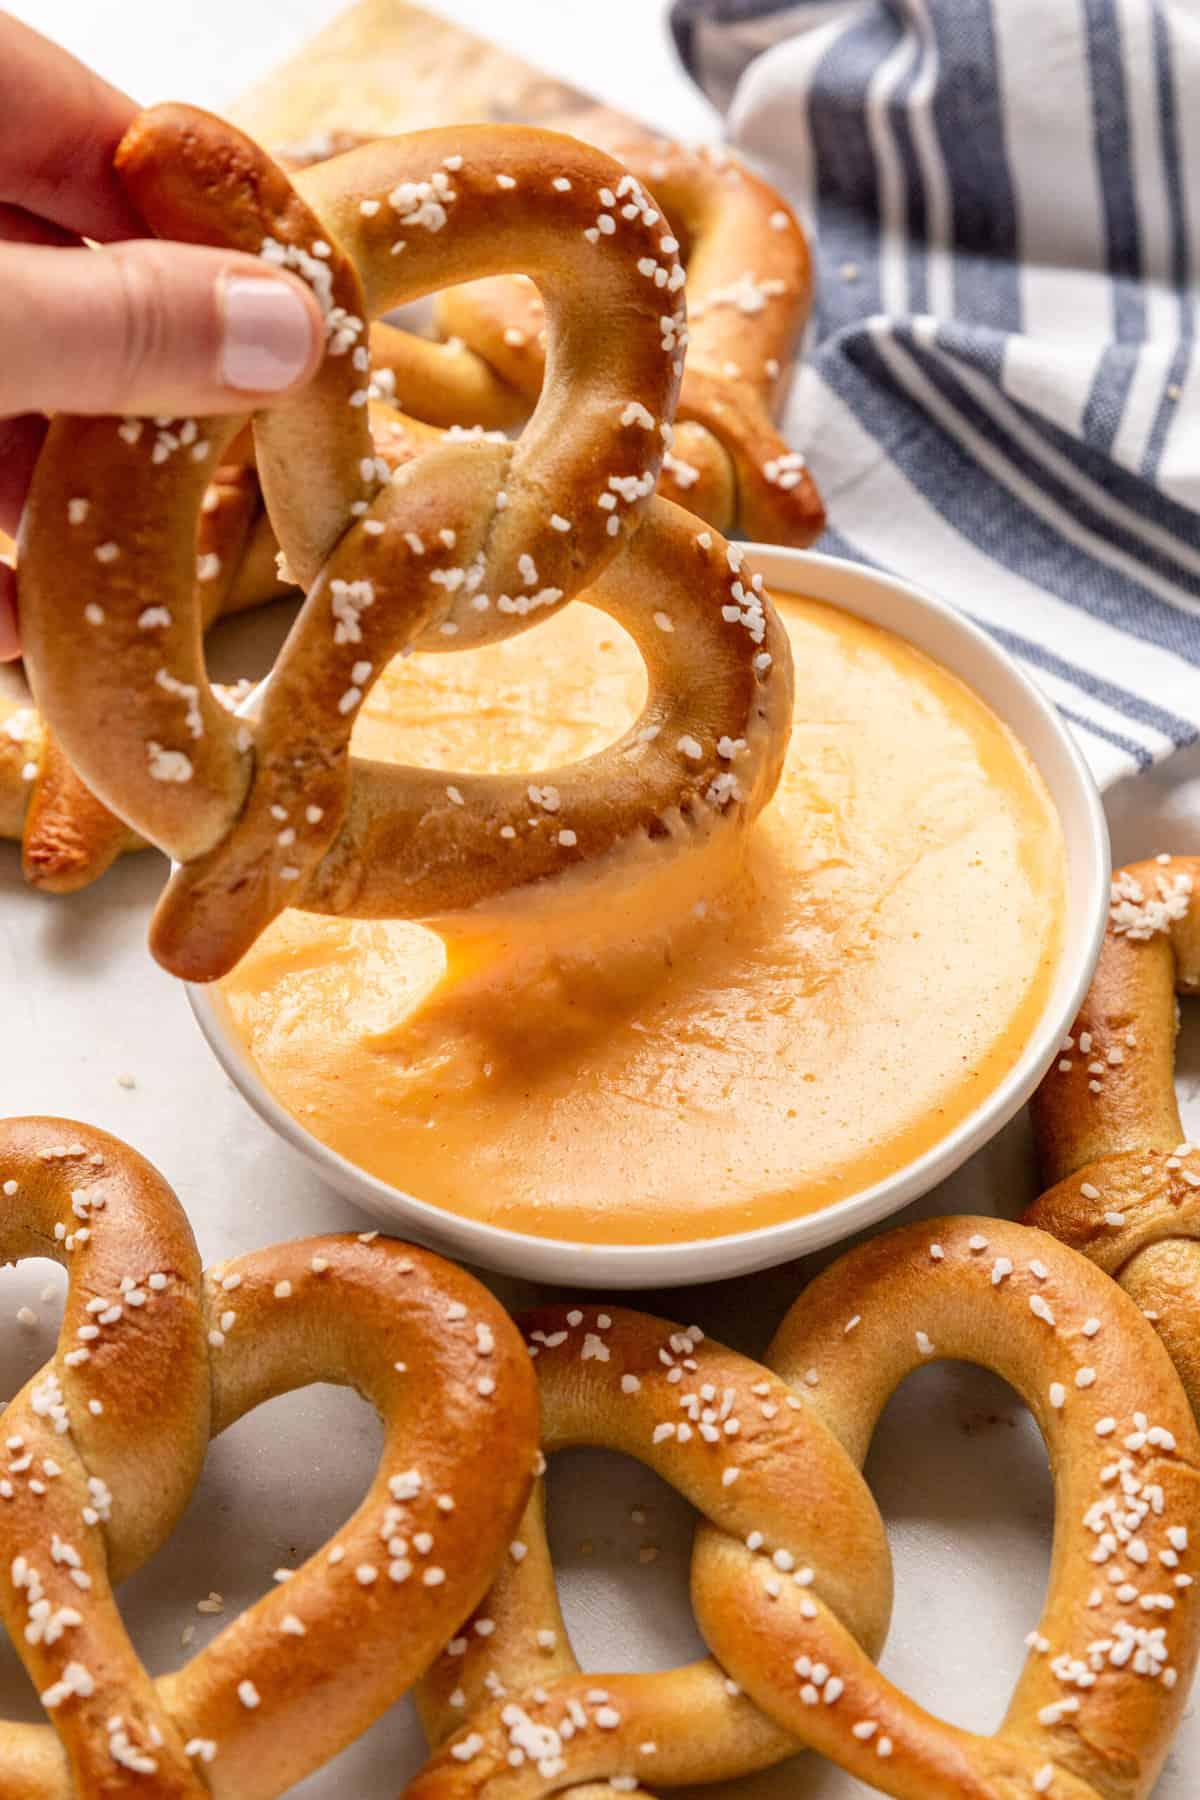 salted pretzel dipping into homemade cheese dip